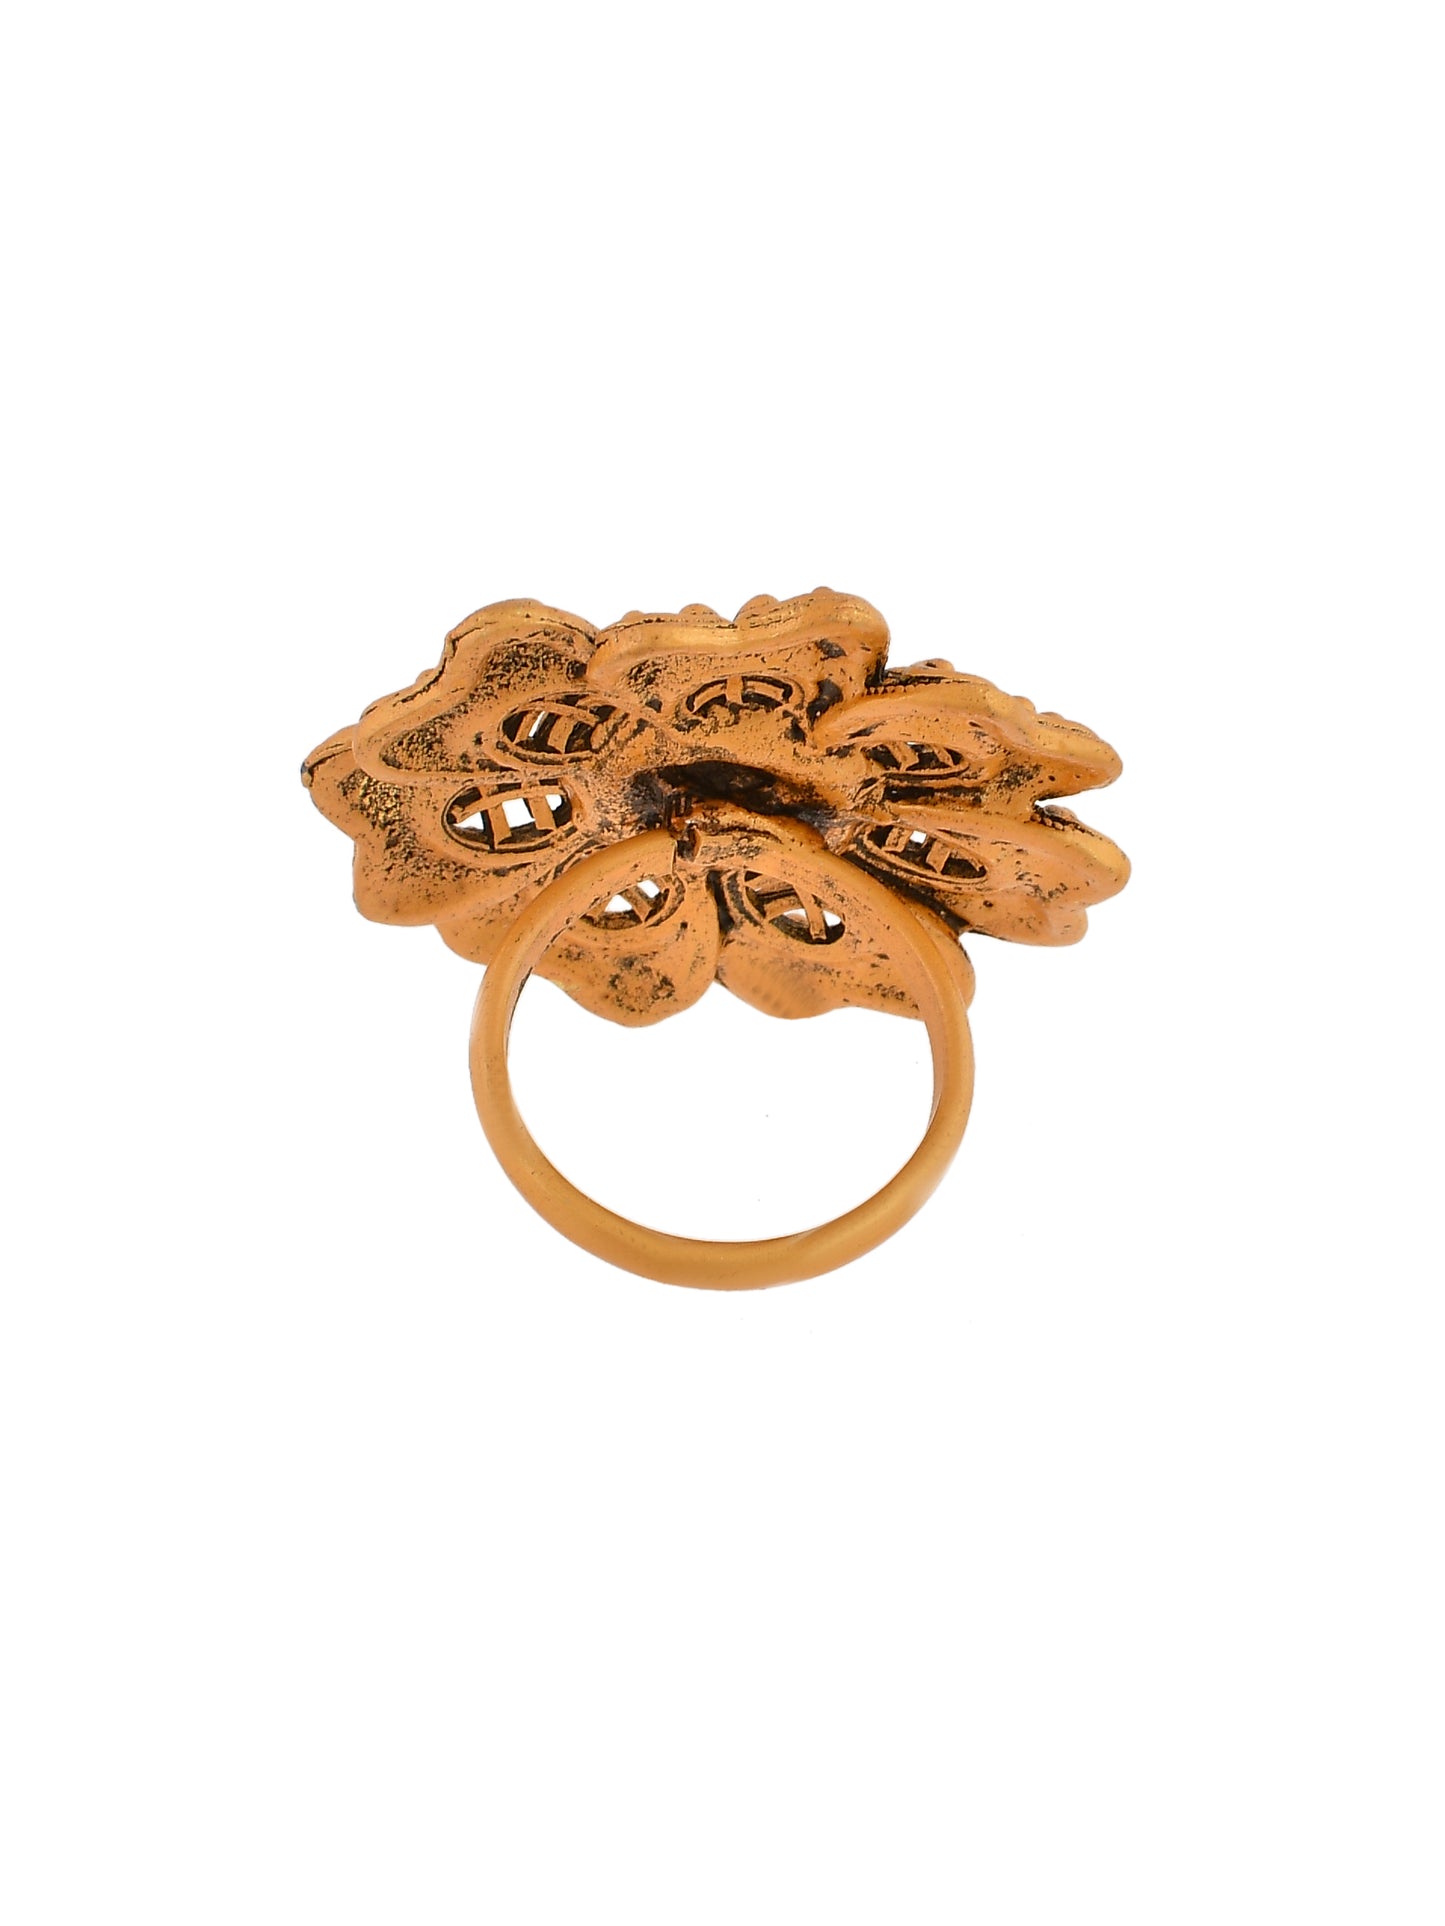 Red Stone South Indian Flower Ring